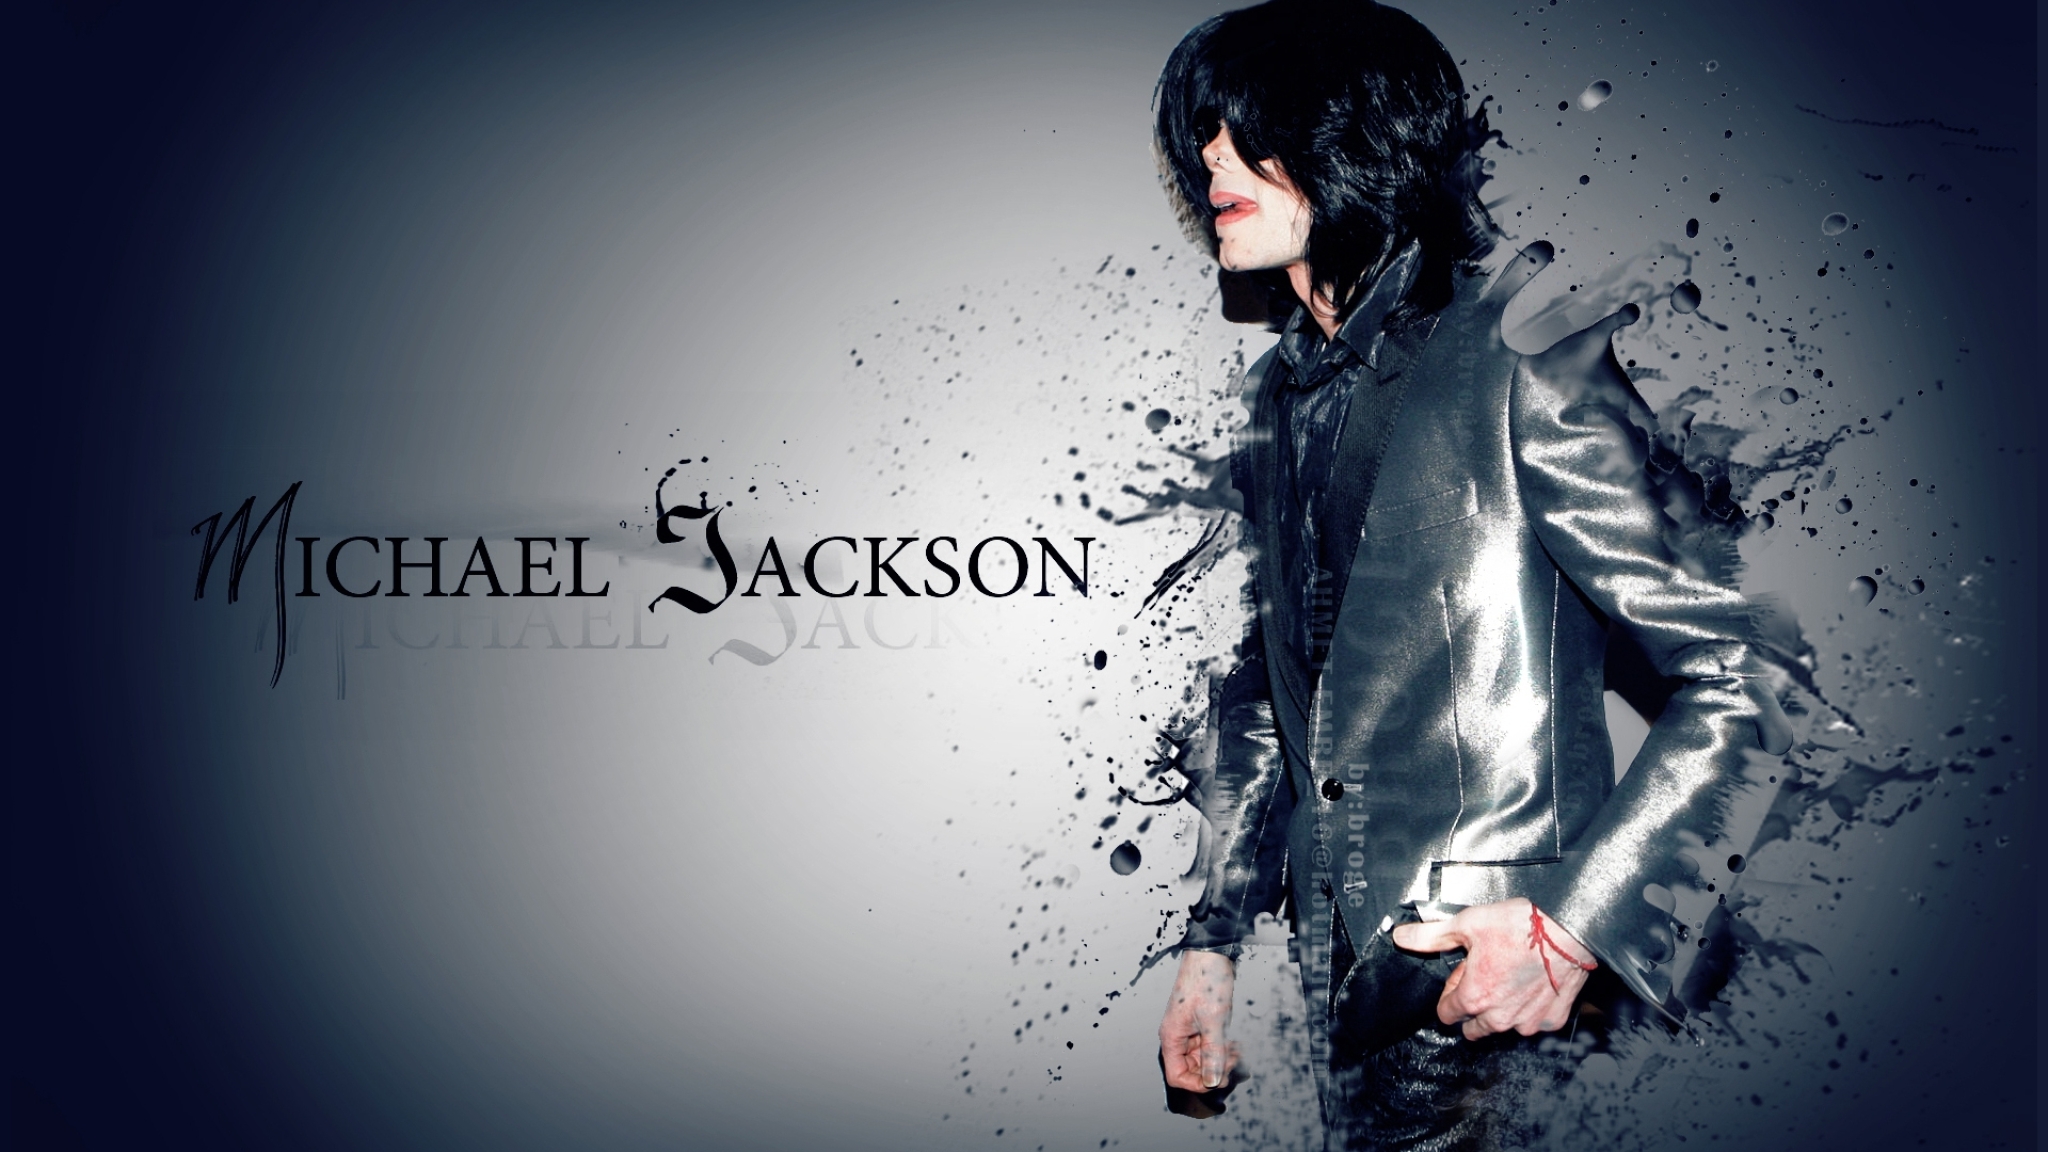 2048x1152 Michael Jackson Glamorous Wallpapers 2048x1152 Resolution Wallpaper Hd Celebrities 4k Wallpapers Images Photos And Background